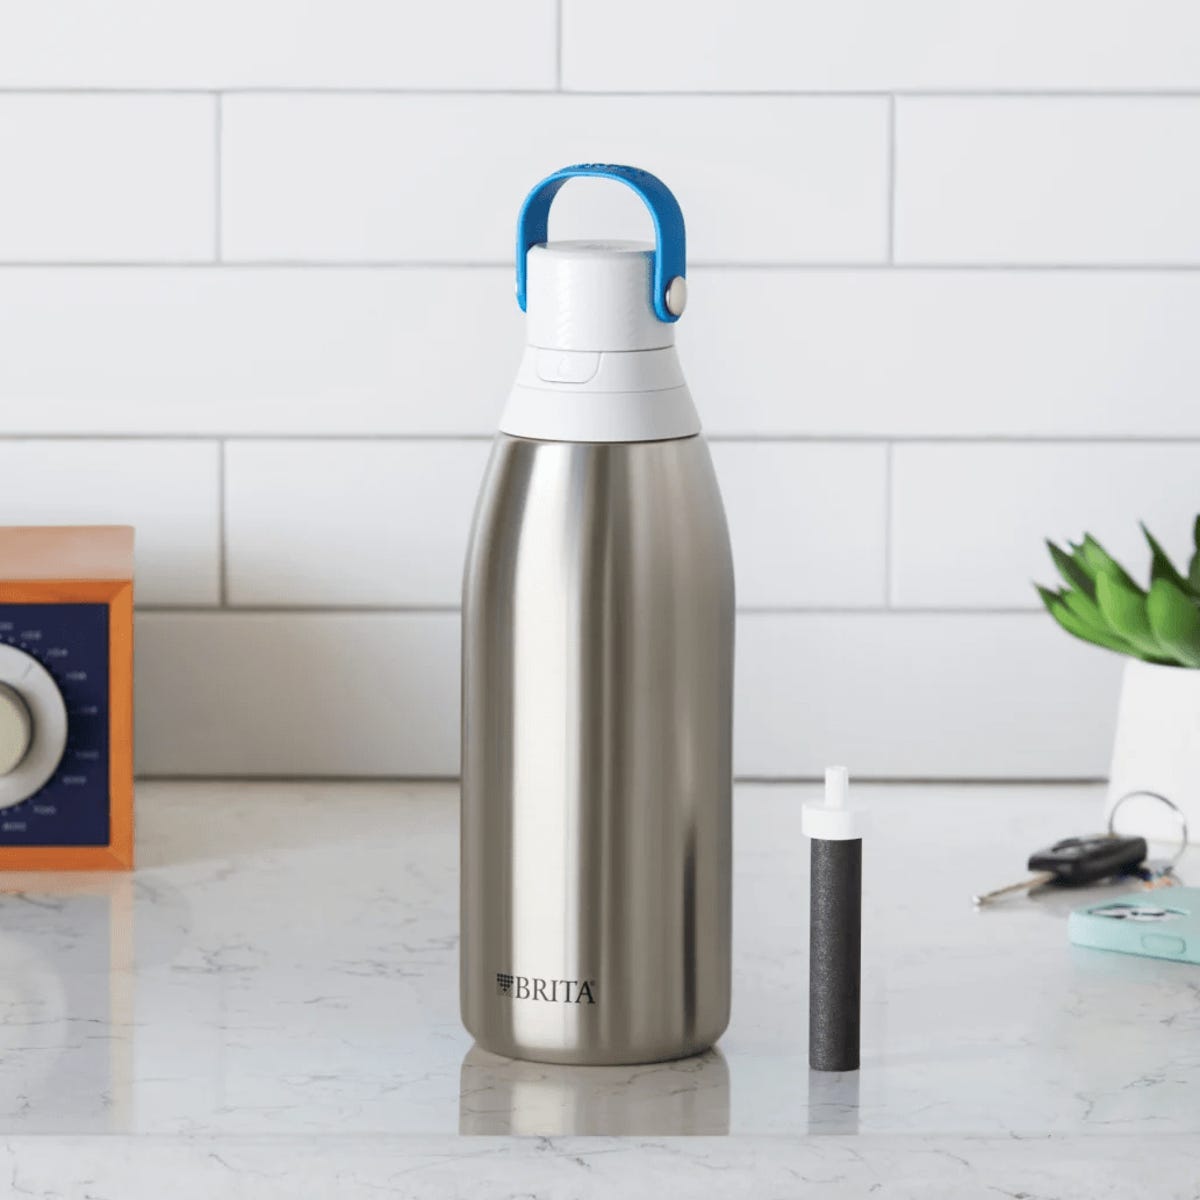 Brita filter pitchers and water bottles are cheap at  today - CNET